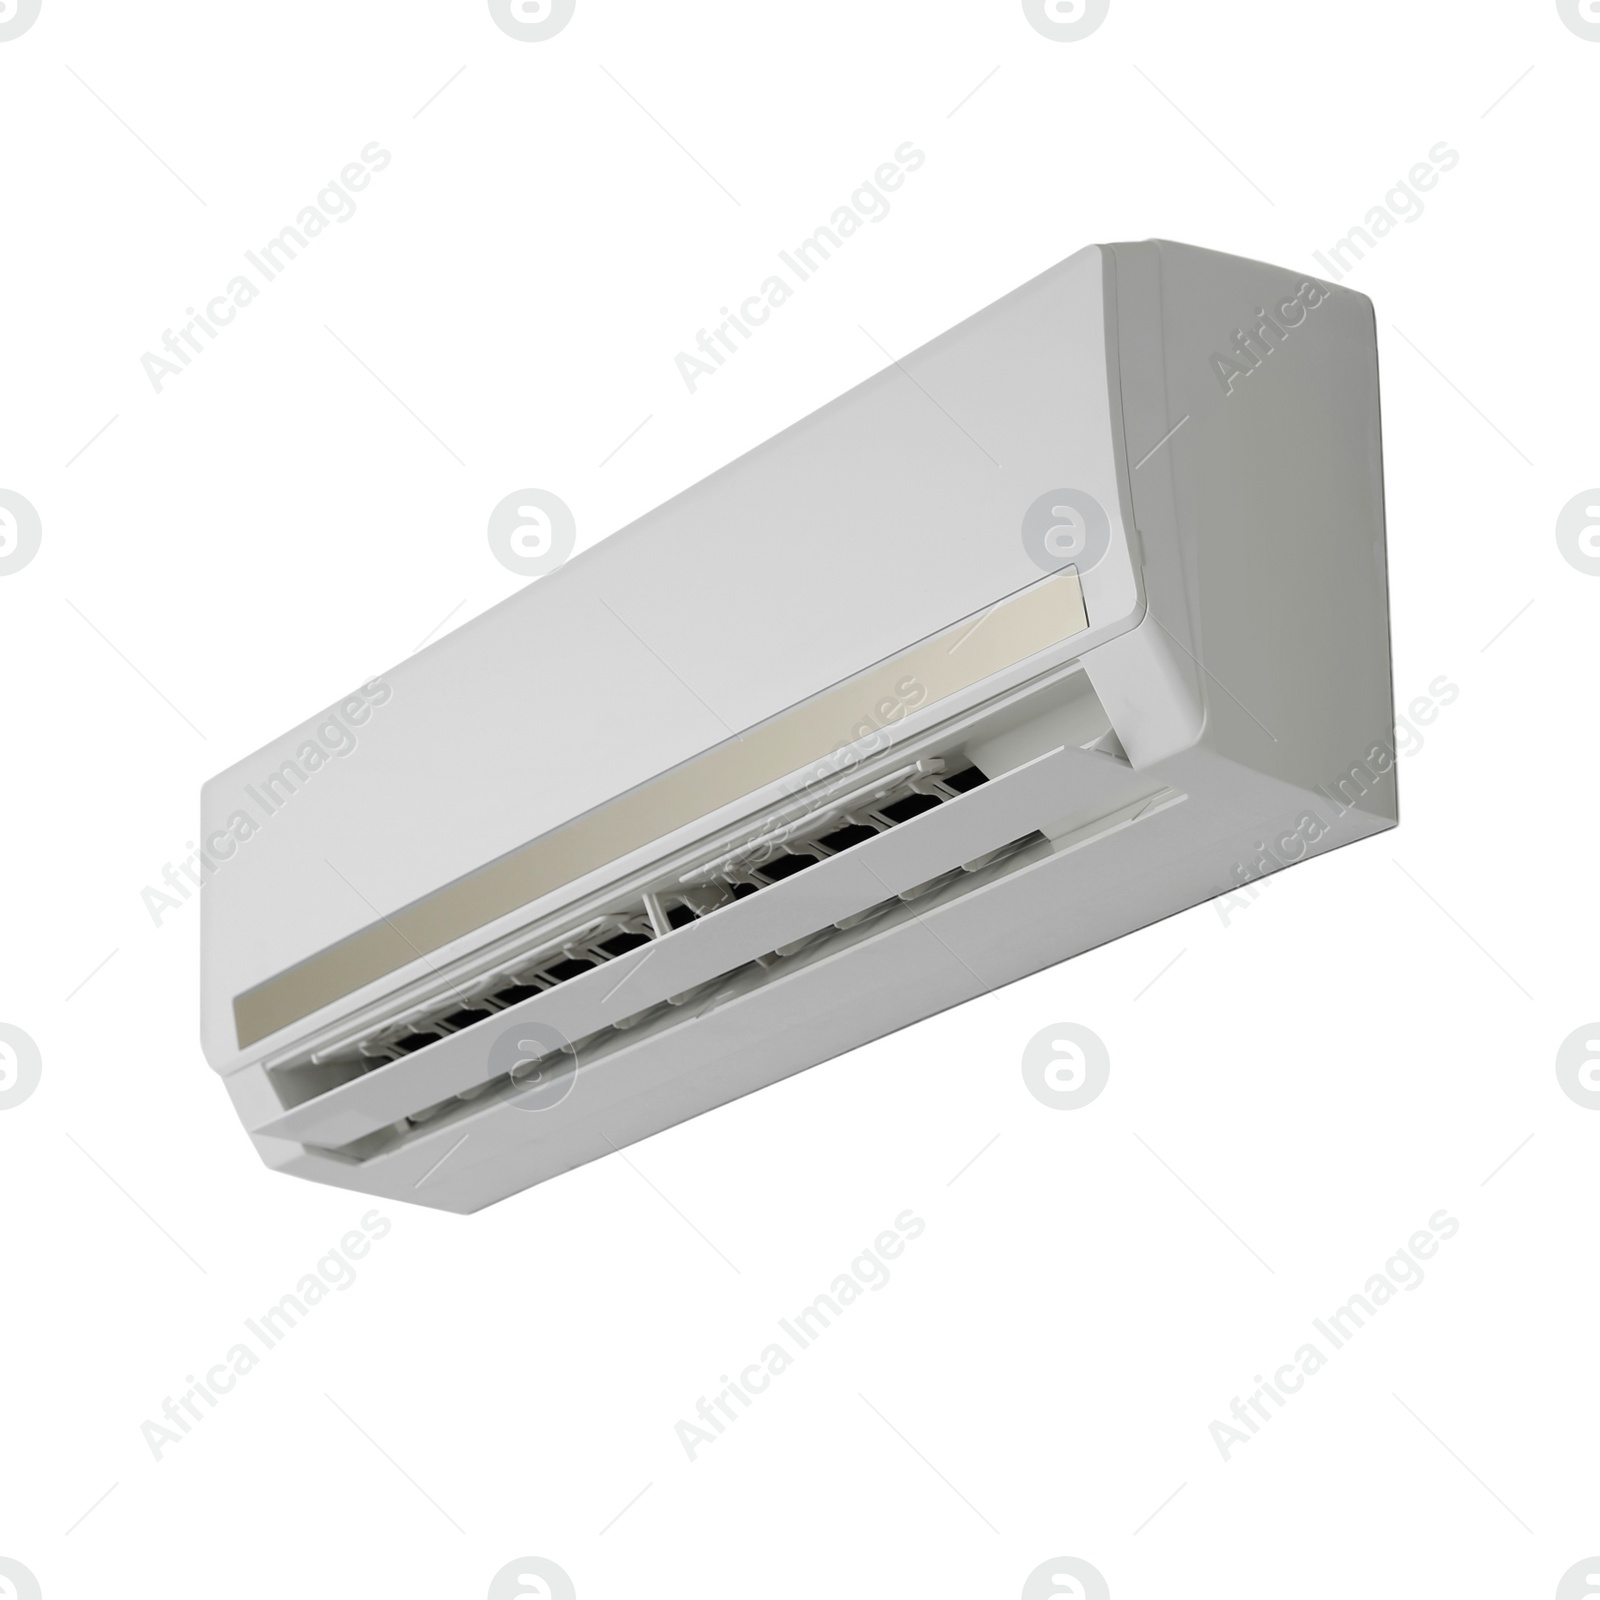 Image of Modern air conditioner isolated on white. Home appliance